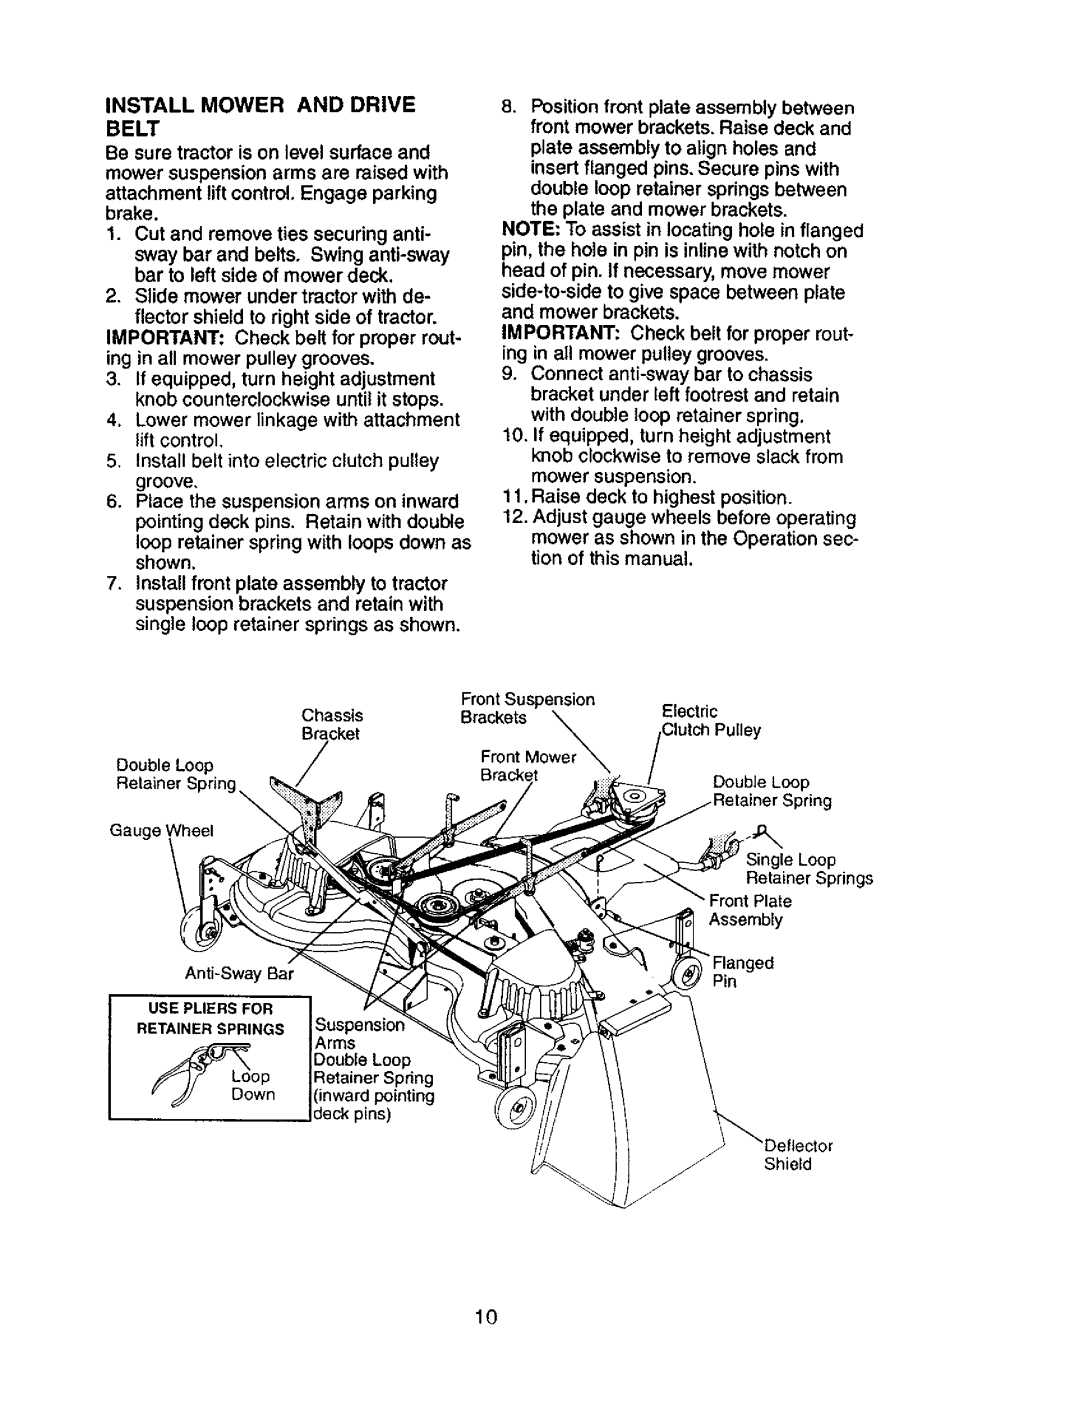 Craftsman 917.27603 manual Install Mower And Drive Belt, Be sure tractor is on level surface and 